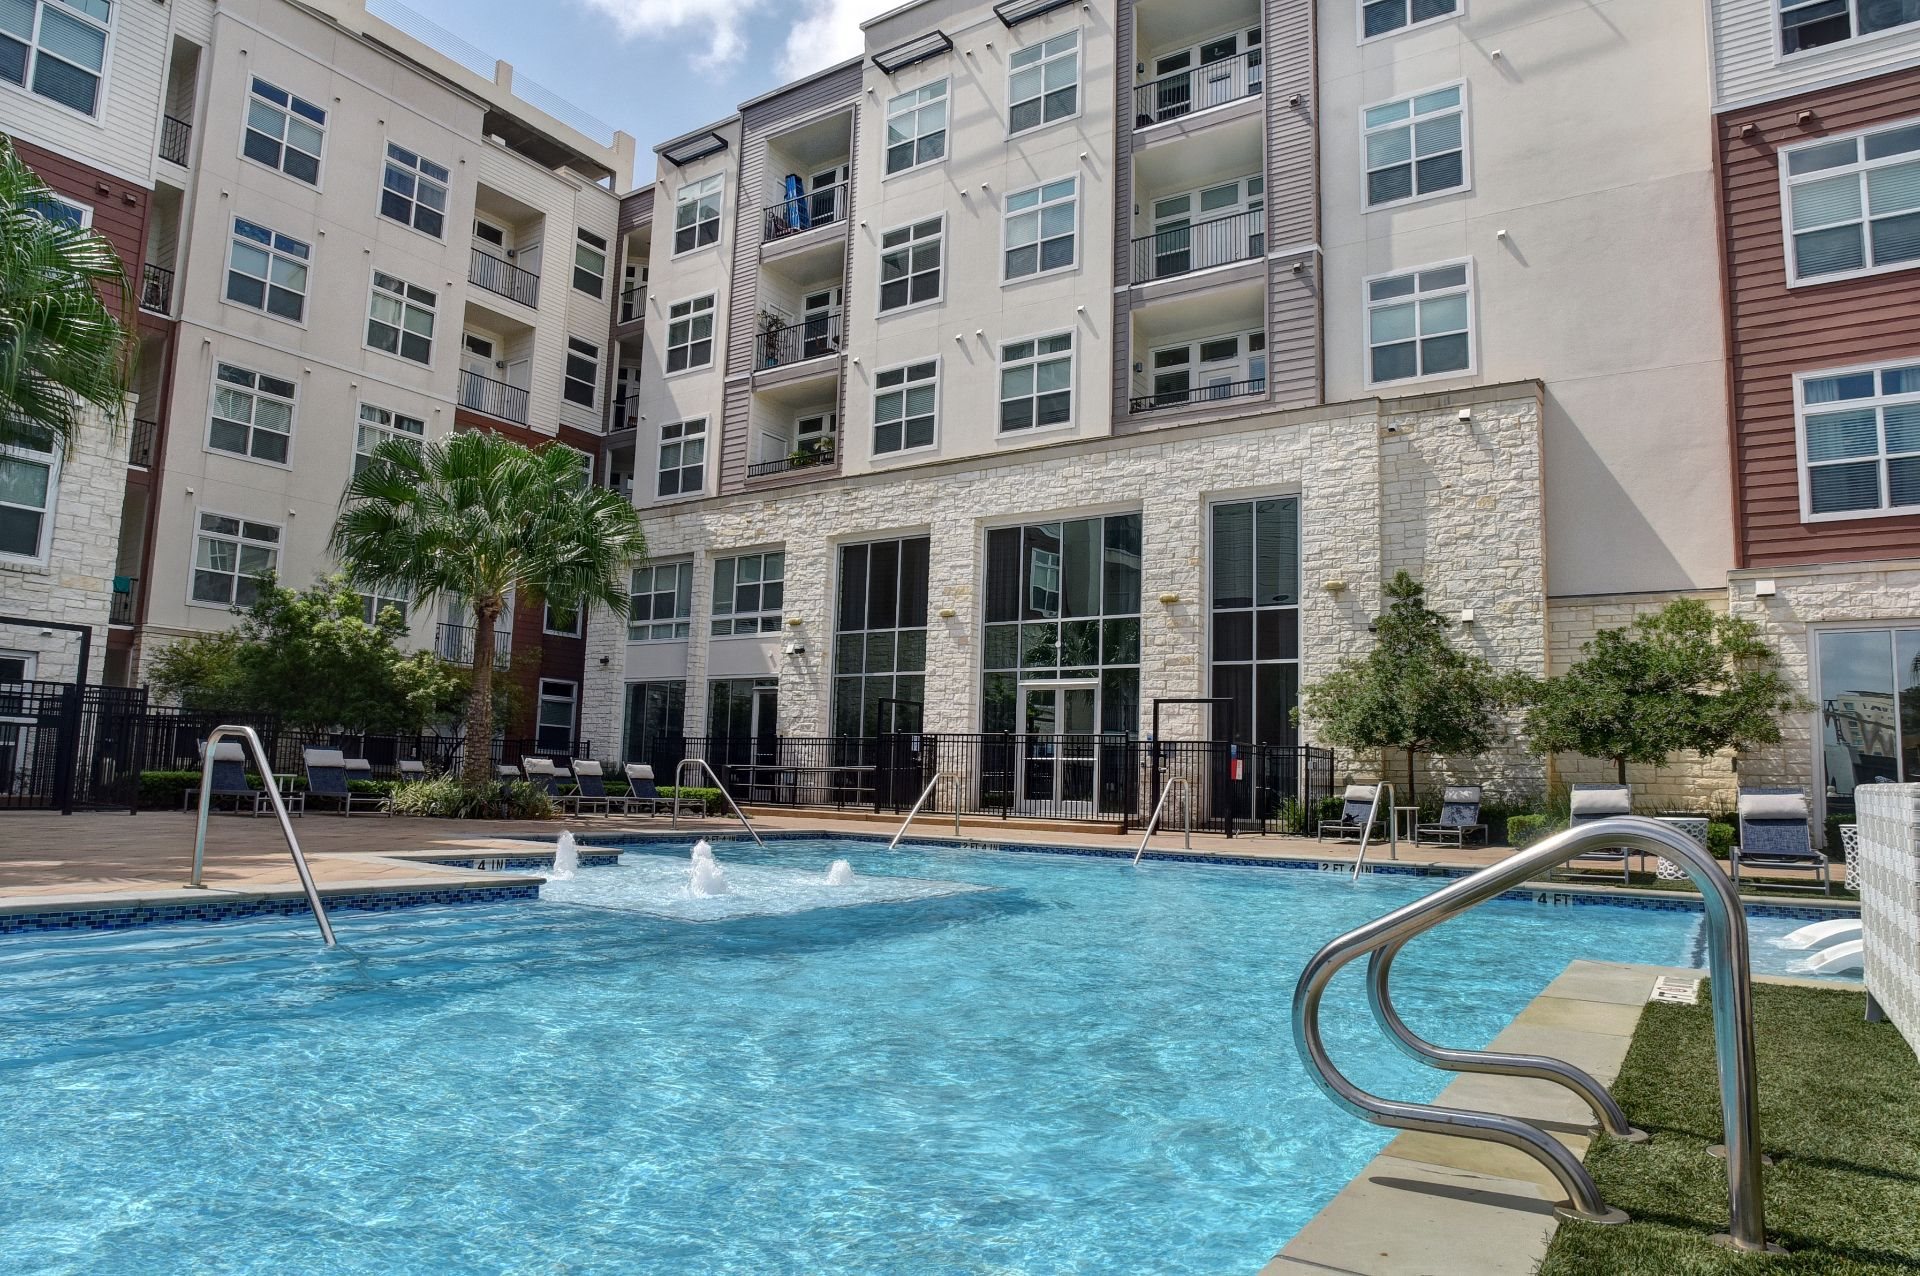 Creatice Apartments Houston Lake Rd for Simple Design